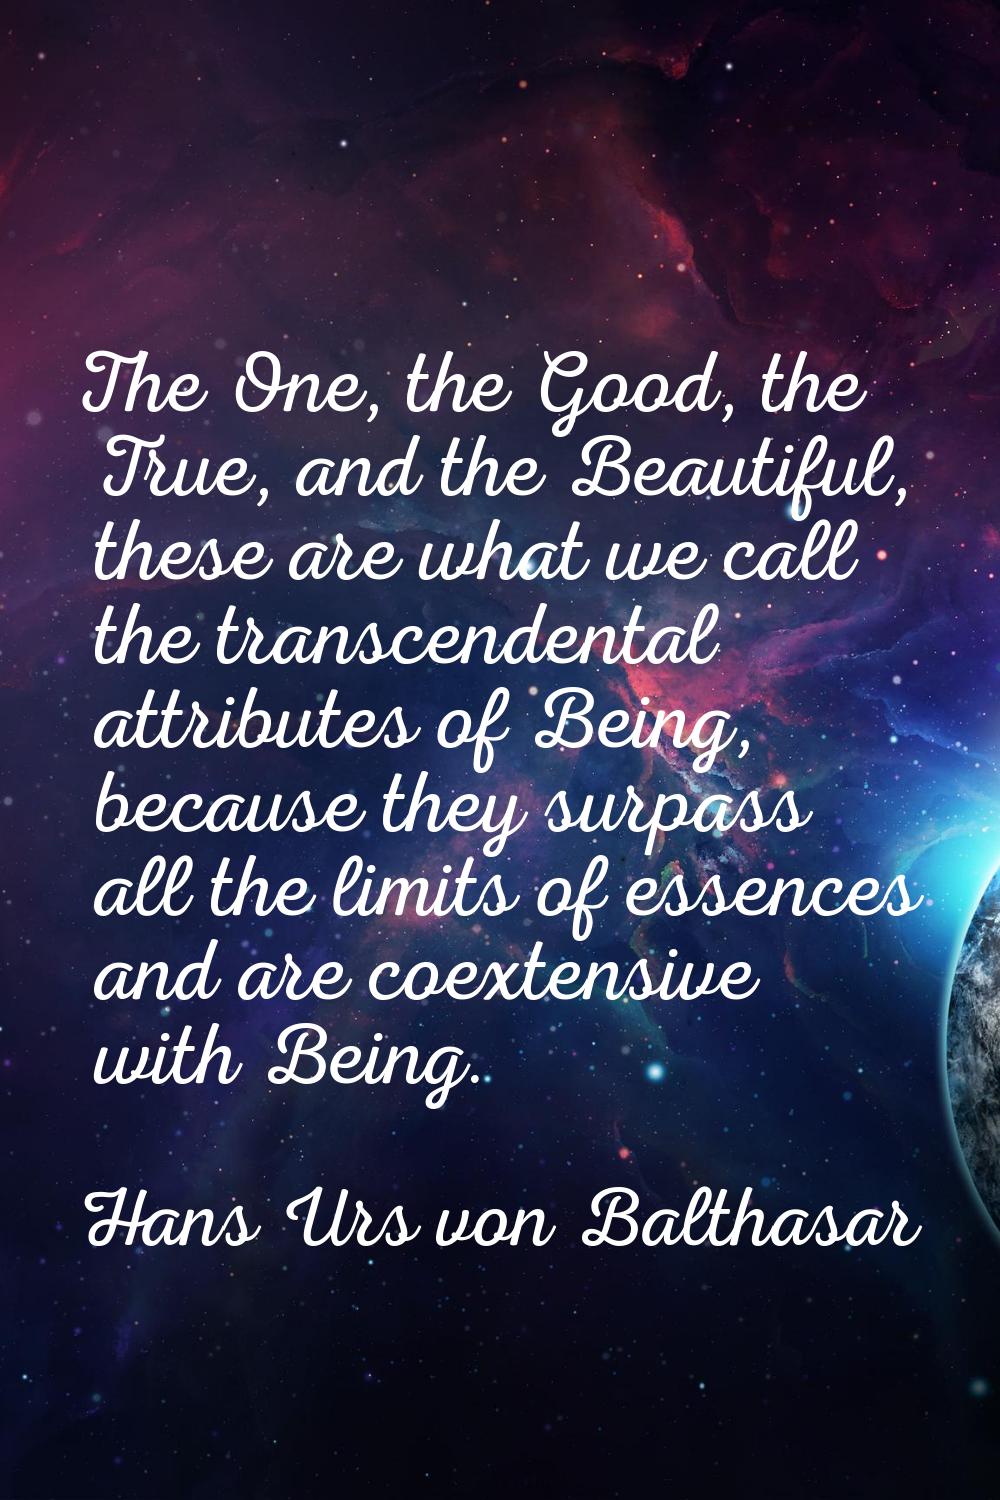 The One, the Good, the True, and the Beautiful, these are what we call the transcendental attribute